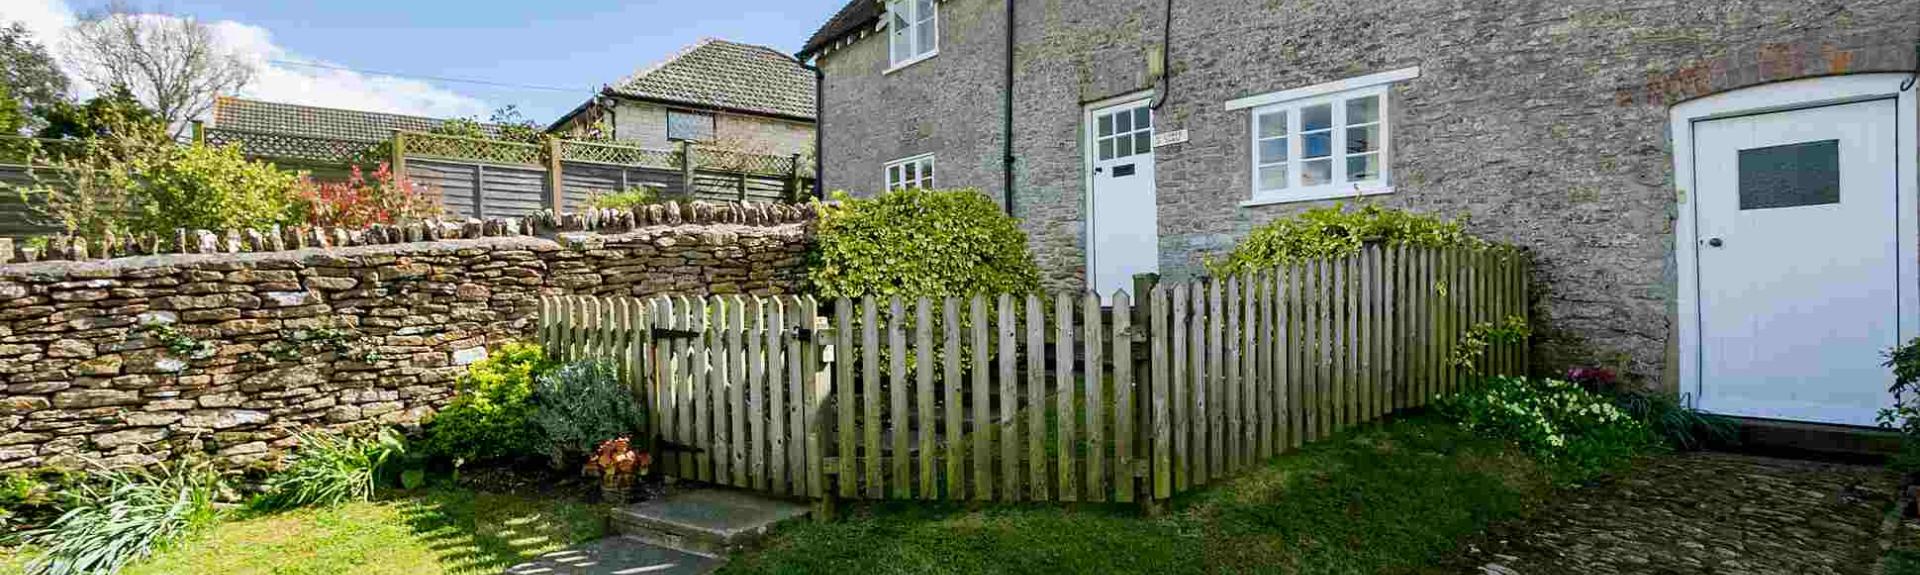 Exterior of a stone-built terraced cottage with a picket fence around the front garden.